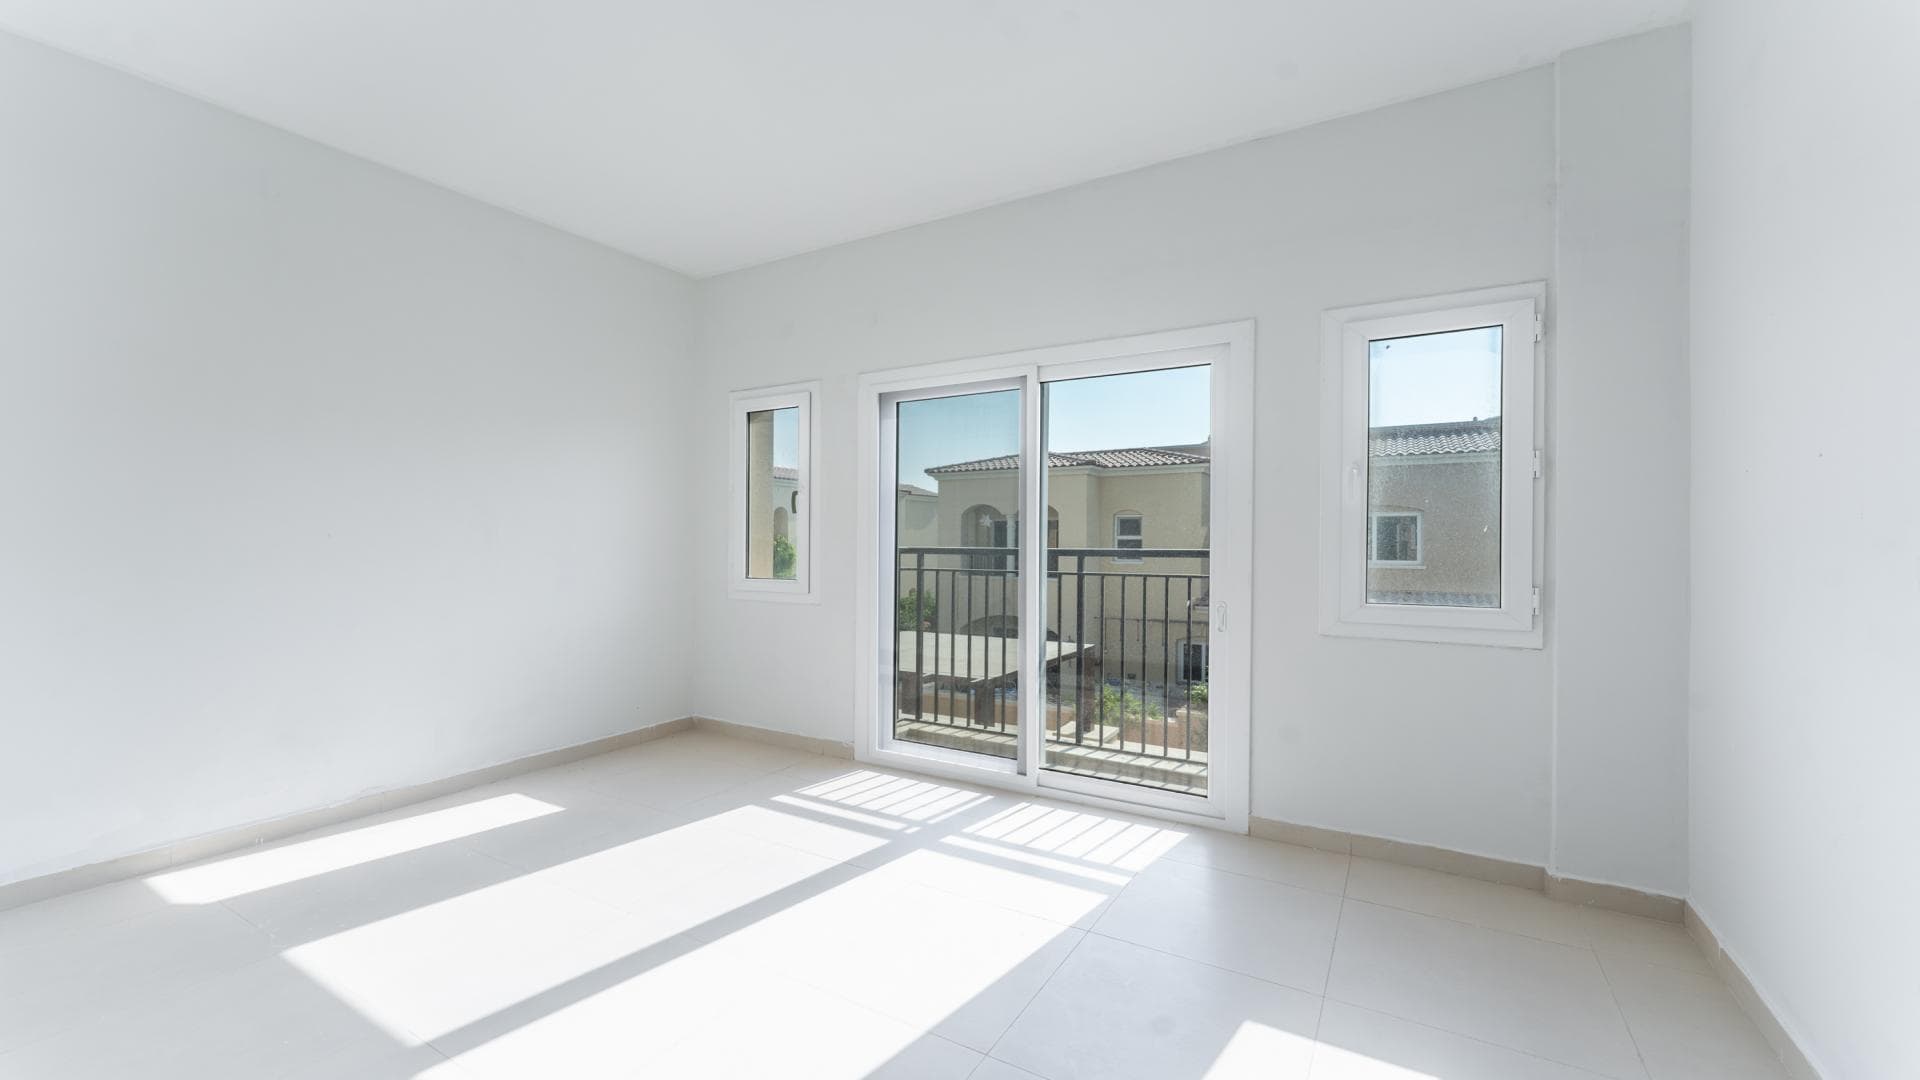 3 Bedroom Townhouse For Rent Executive Bay B Lp37915 1be154fa79362700.jpg